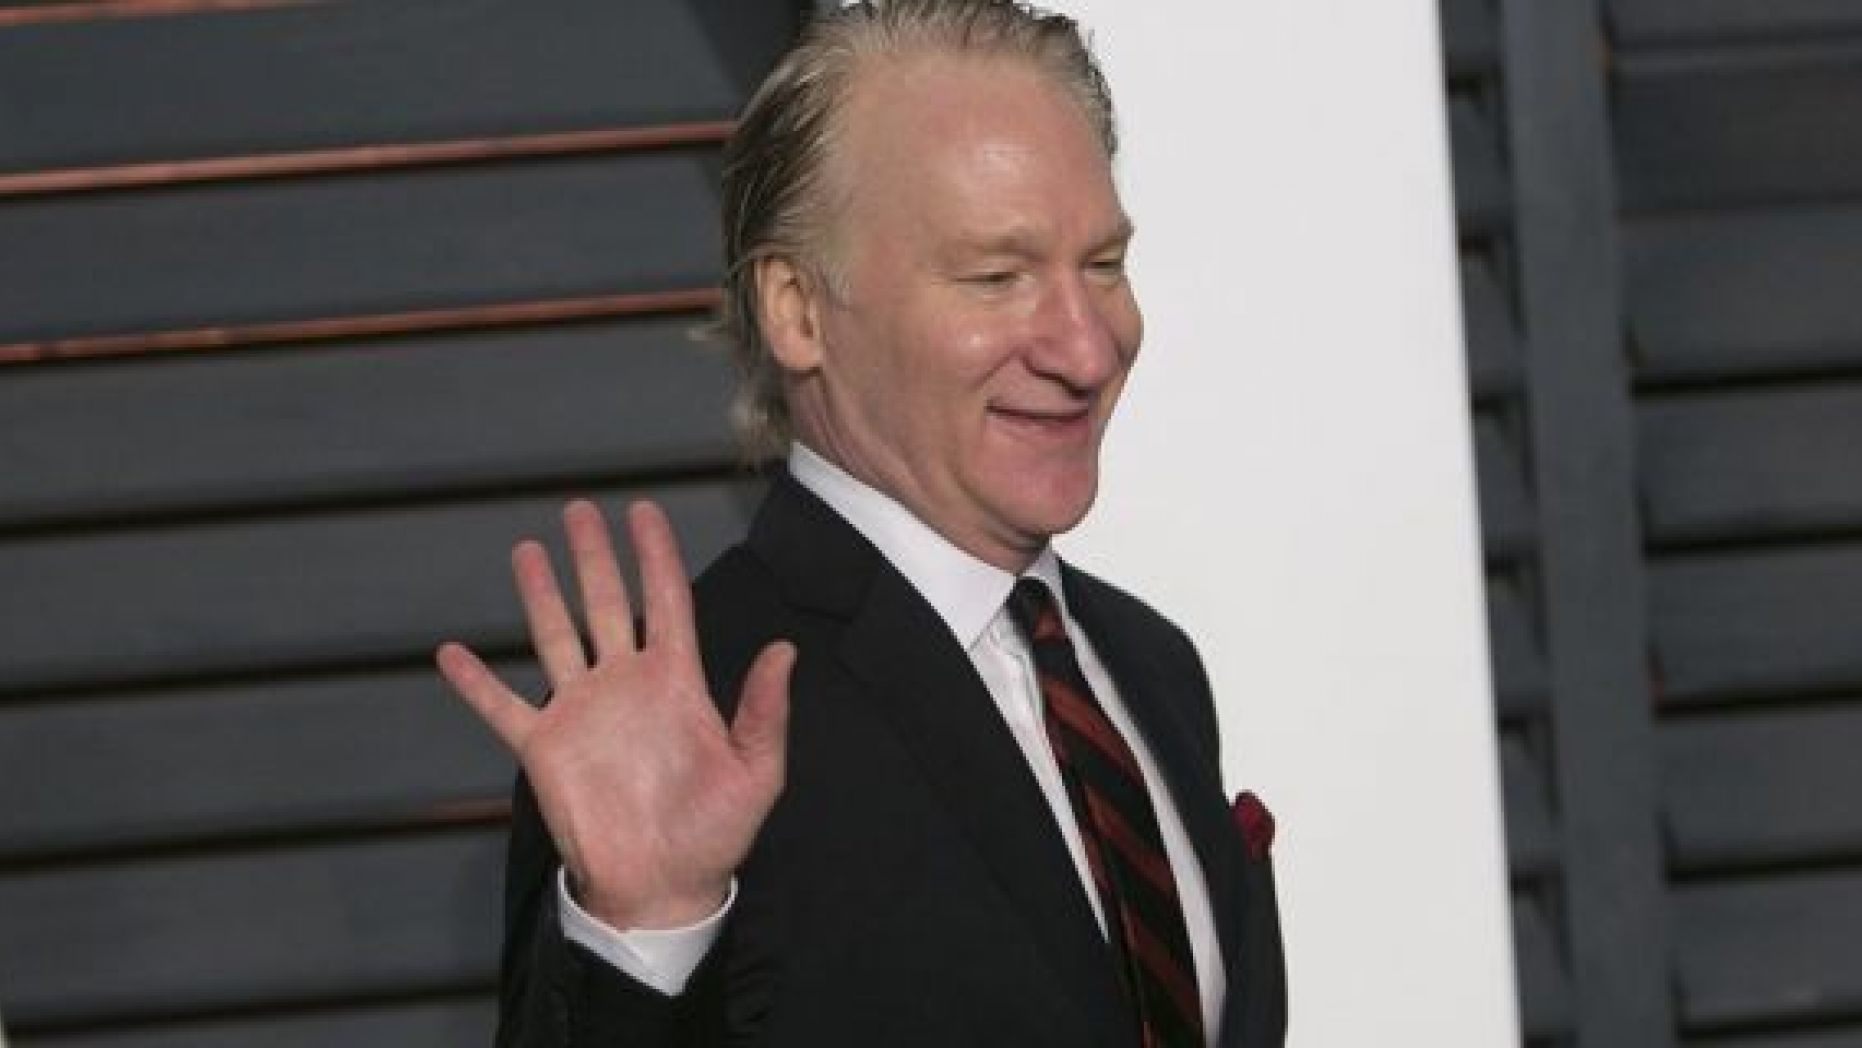 Bill Maher arrives at the 2015 Vanity Fair Oscar Party in Beverly Hills, California. (ADRIAN SANCHEZ-GONZALEZ/AFP/Getty Images)